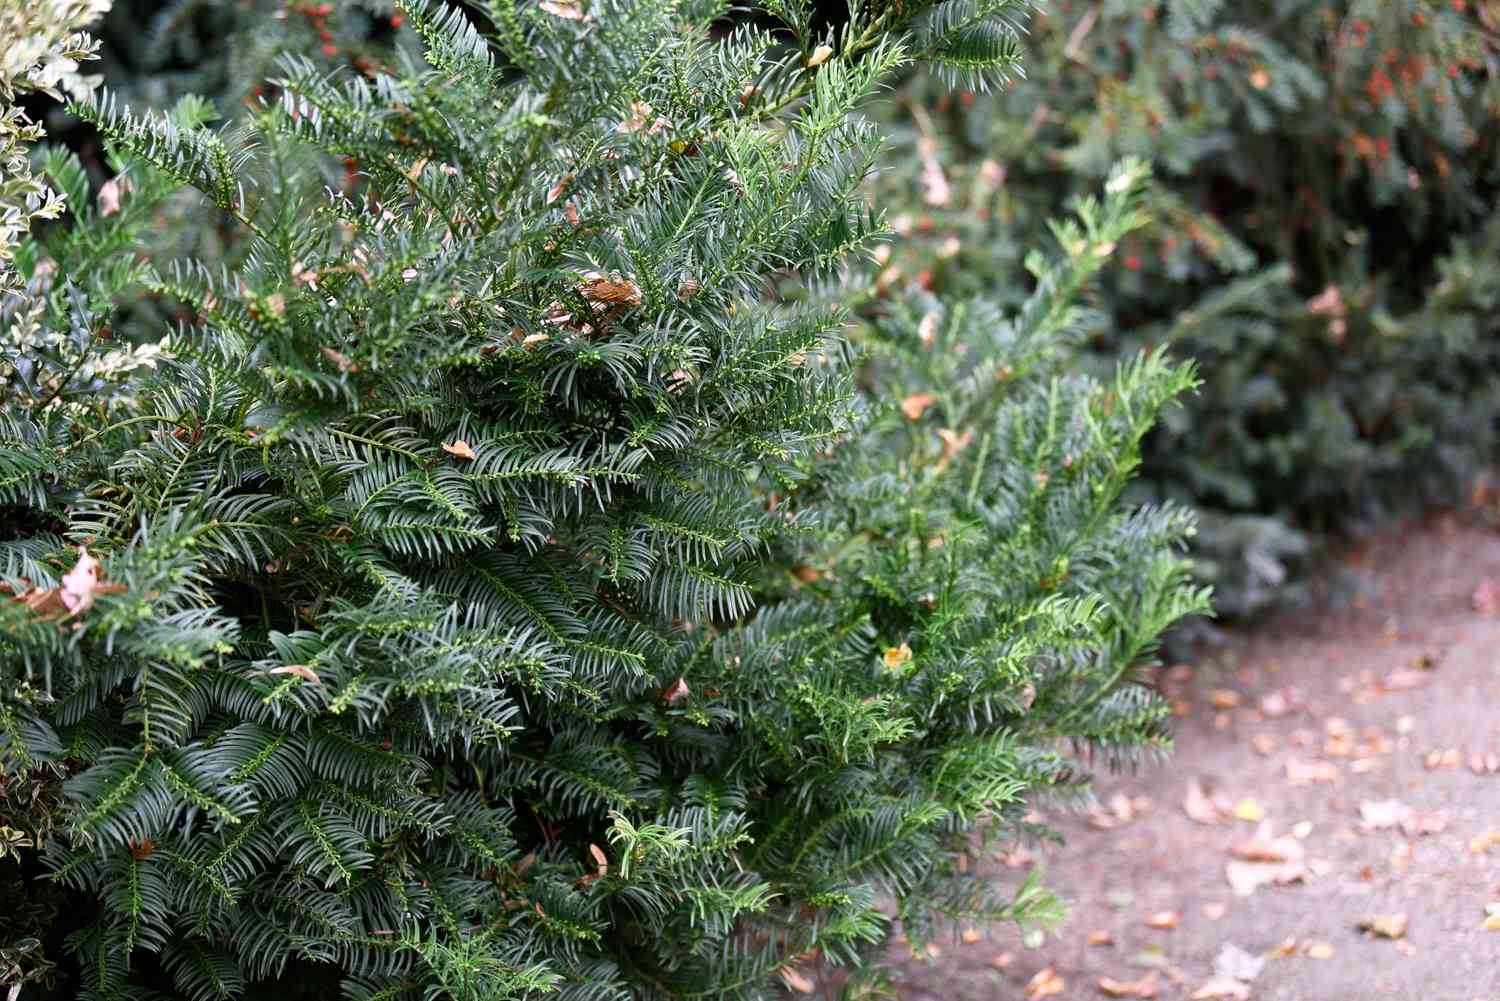 Japanese plum yew shrub with needled leaves on branches covered with brown fallen leaves